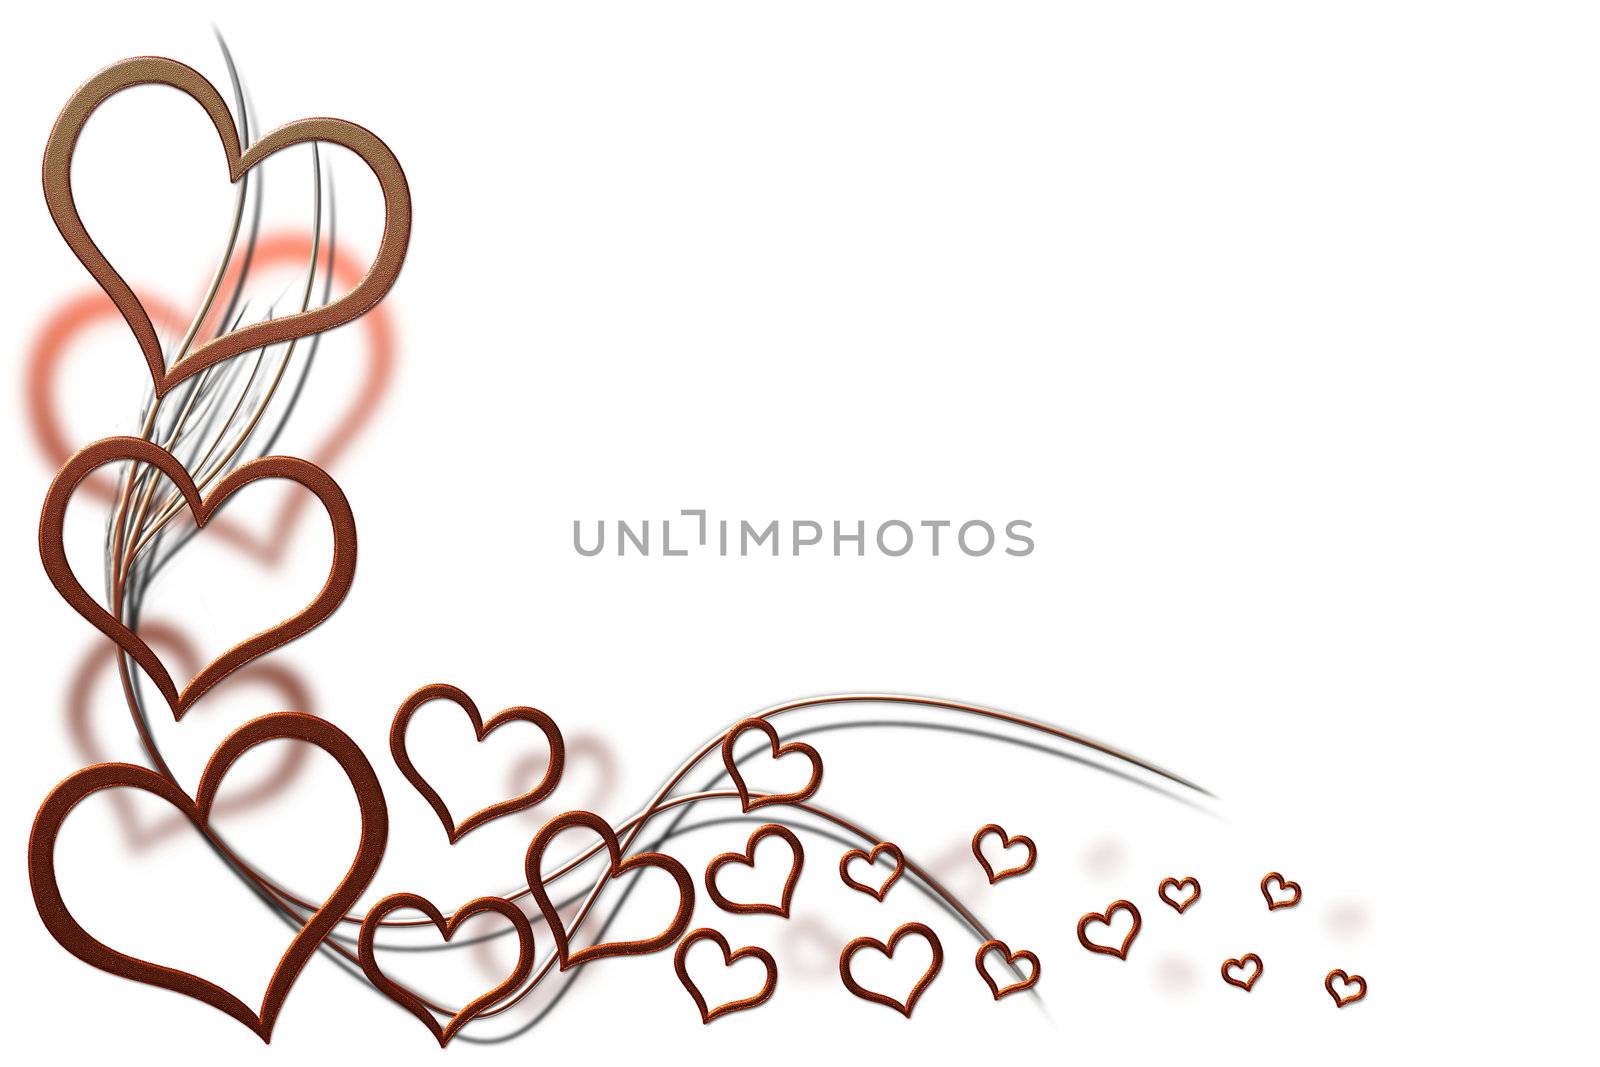 Valentines day background for your designs with red hearts and swirls